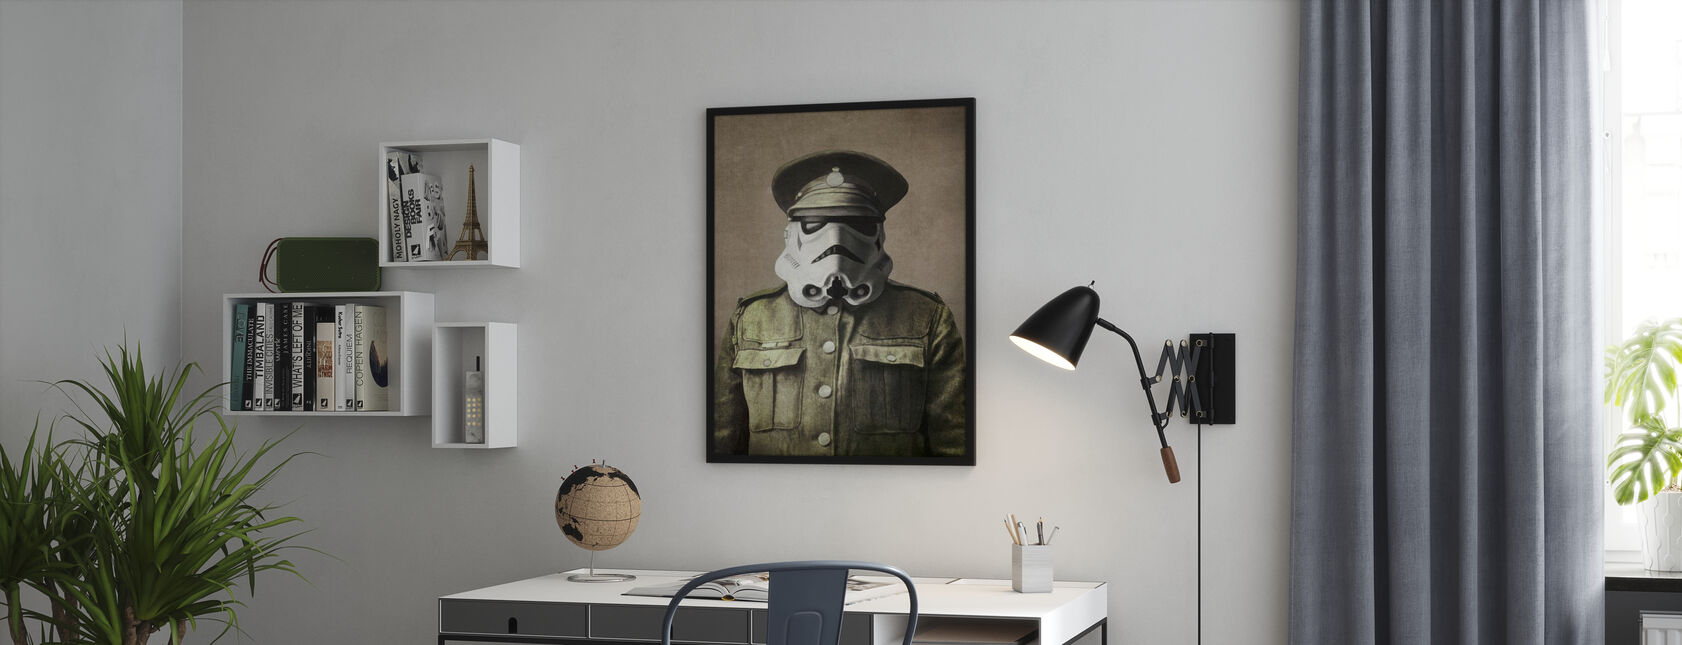 Victorian Wars Sgt. Stormley - Poster - Office